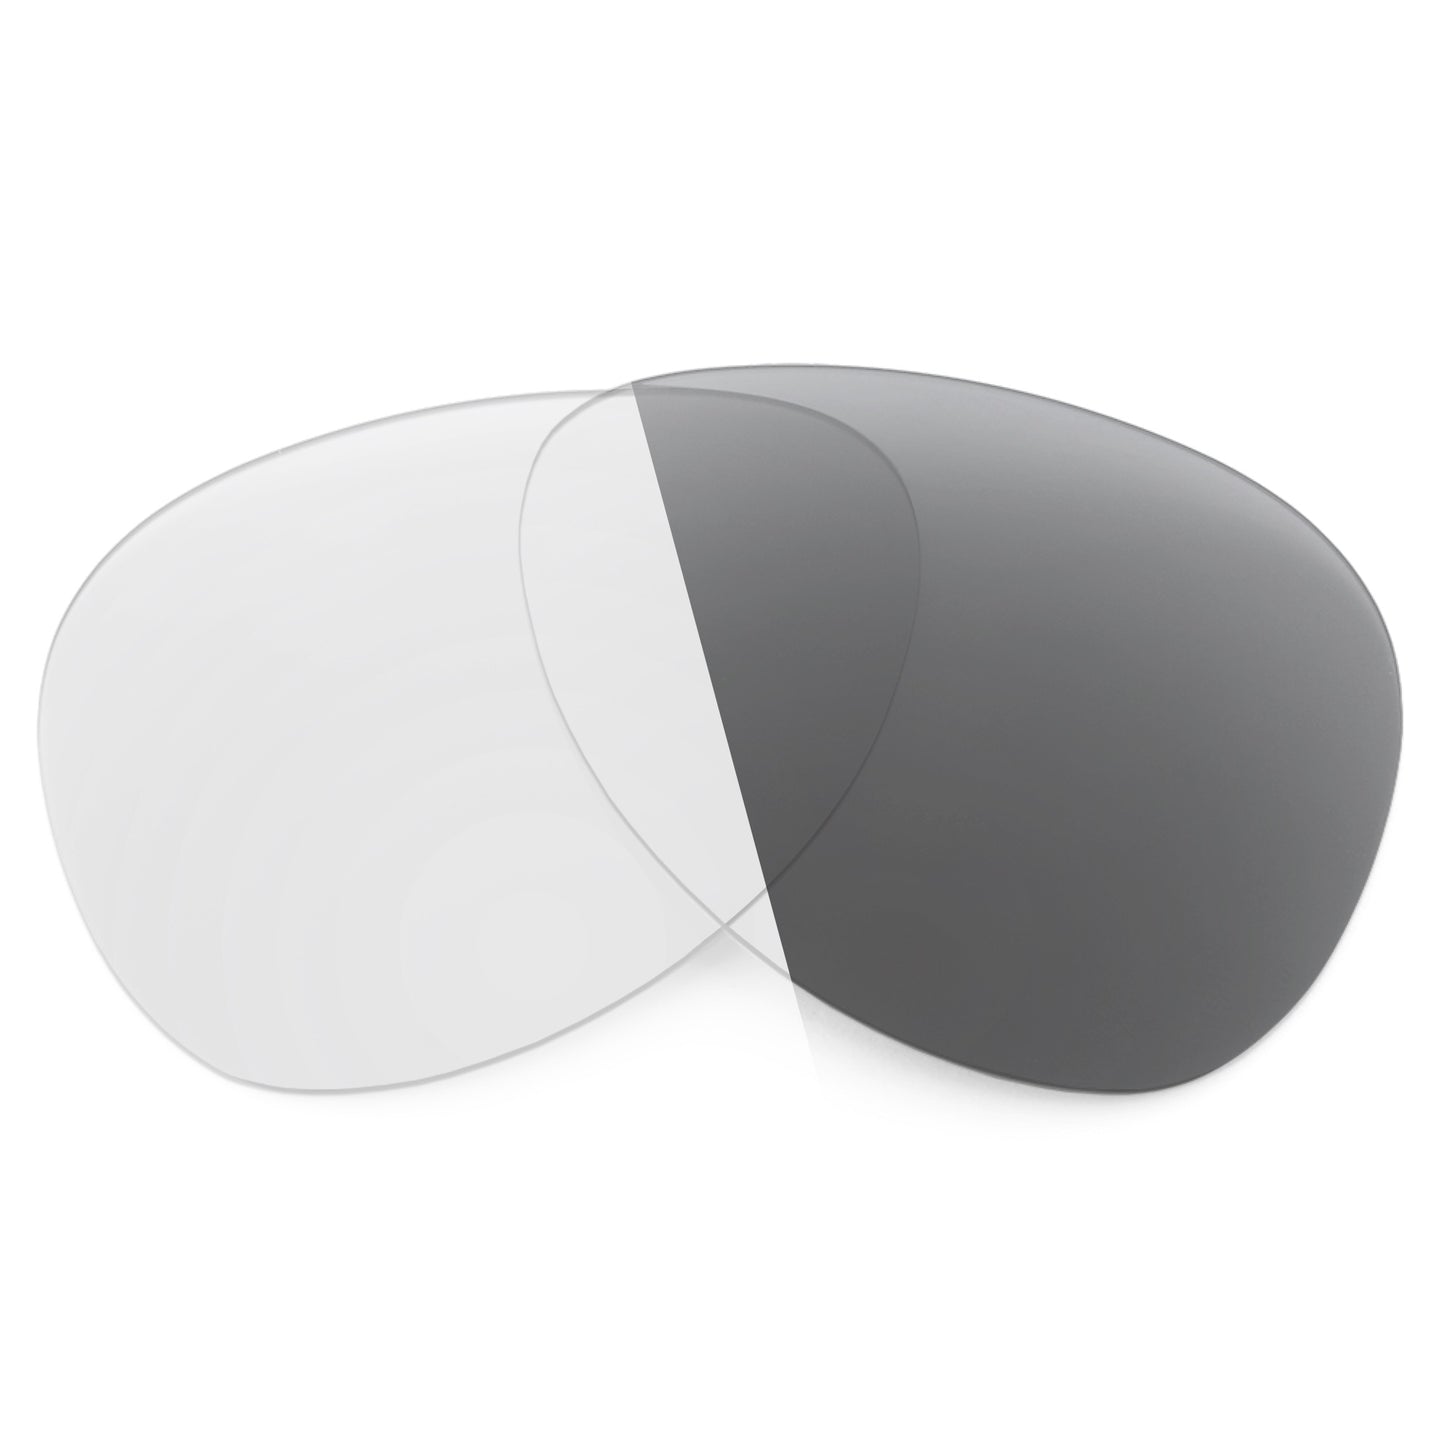 Revant replacement lenses for Ray-Ban RB3519 59mm Non-Polarized Adapt Gray Photochromic